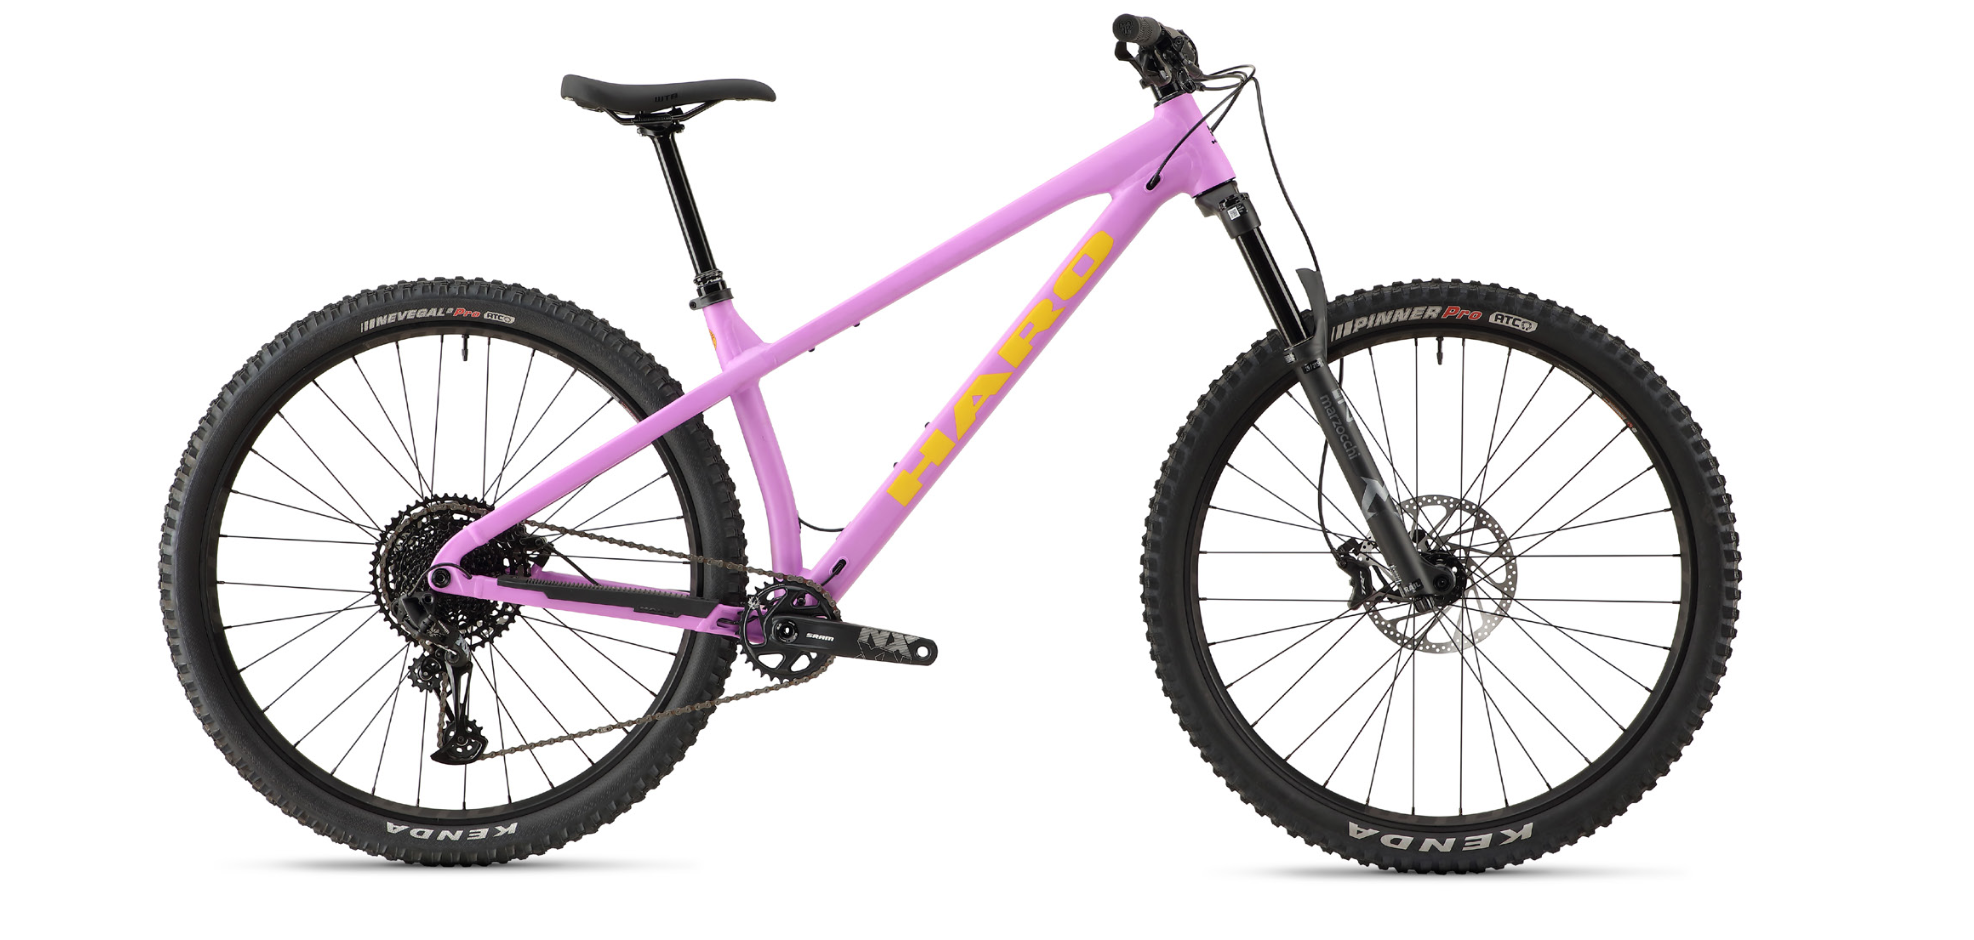 Haro is showing its new line of Saguaro 'hardcore hardtails' at CABDA West.